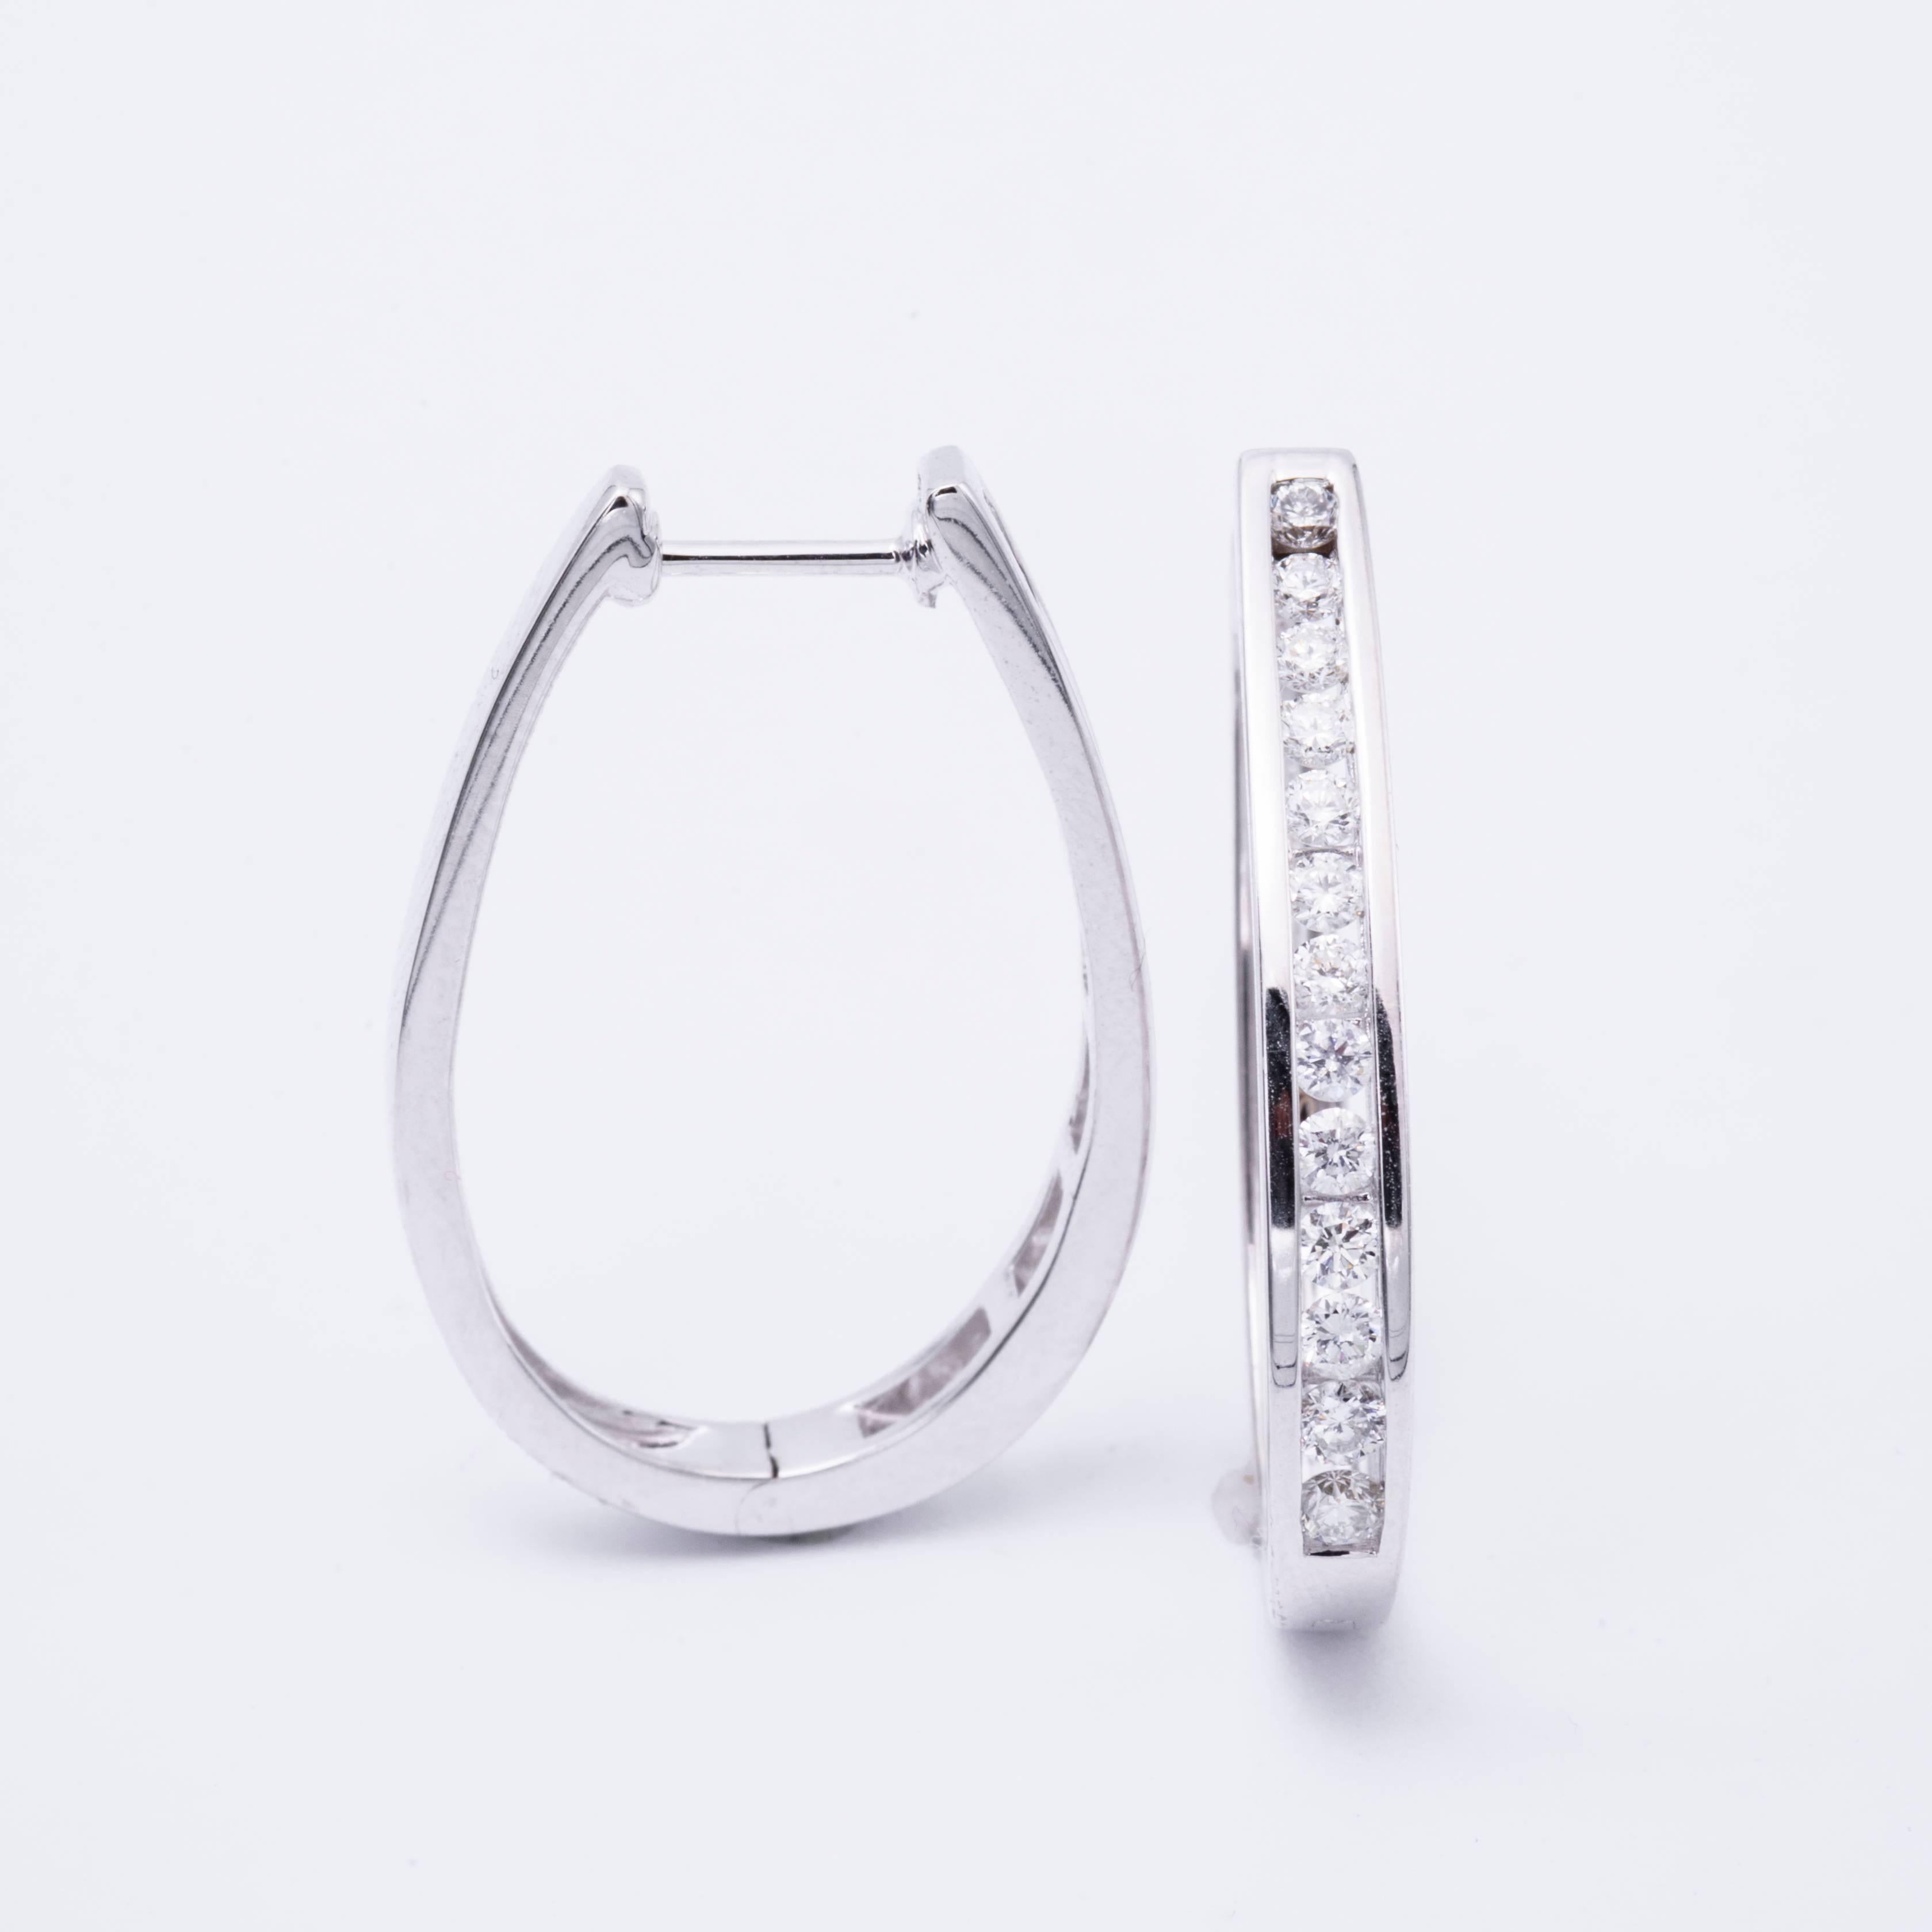 14  k white gold, this beautiful hoop earrings is 29 mm long and features 1.00 carat total weight of  diamonds in H Color ans SI Clarity